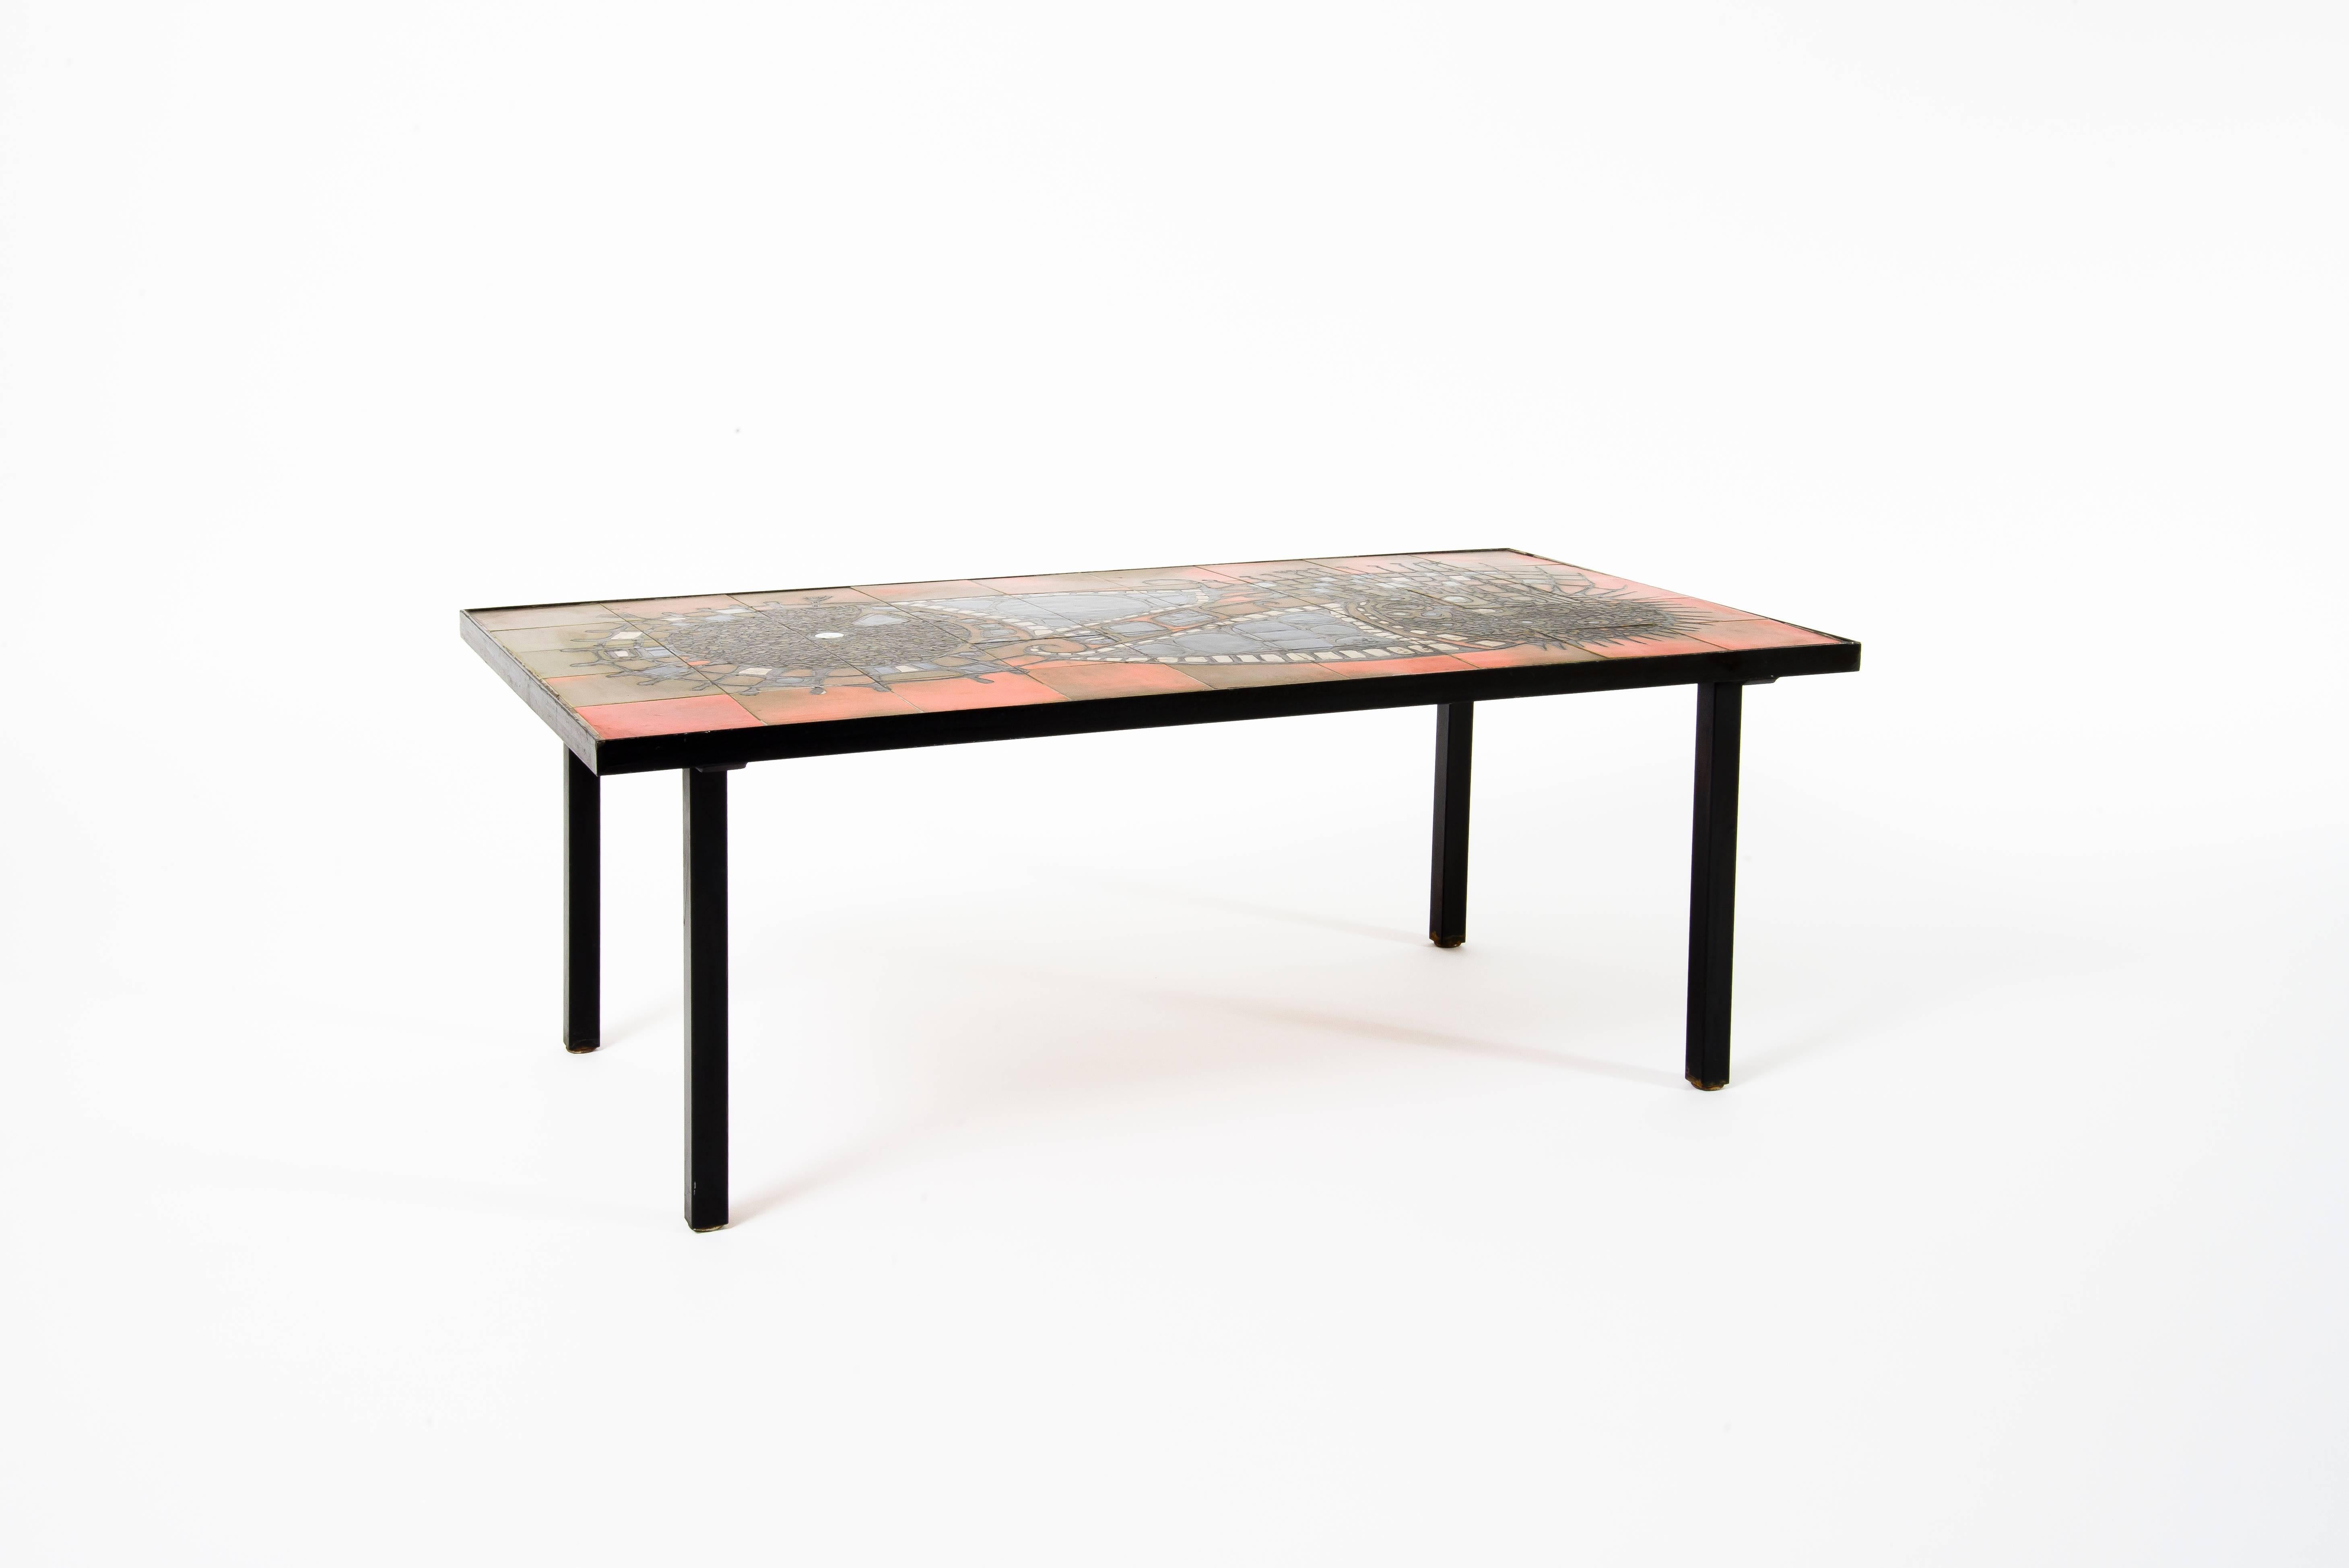 One-off coffee table with an abstract composition by the Belgian ceramic workshop Perignem. Glazed ceramic tiles and a black lacquered metal frame.